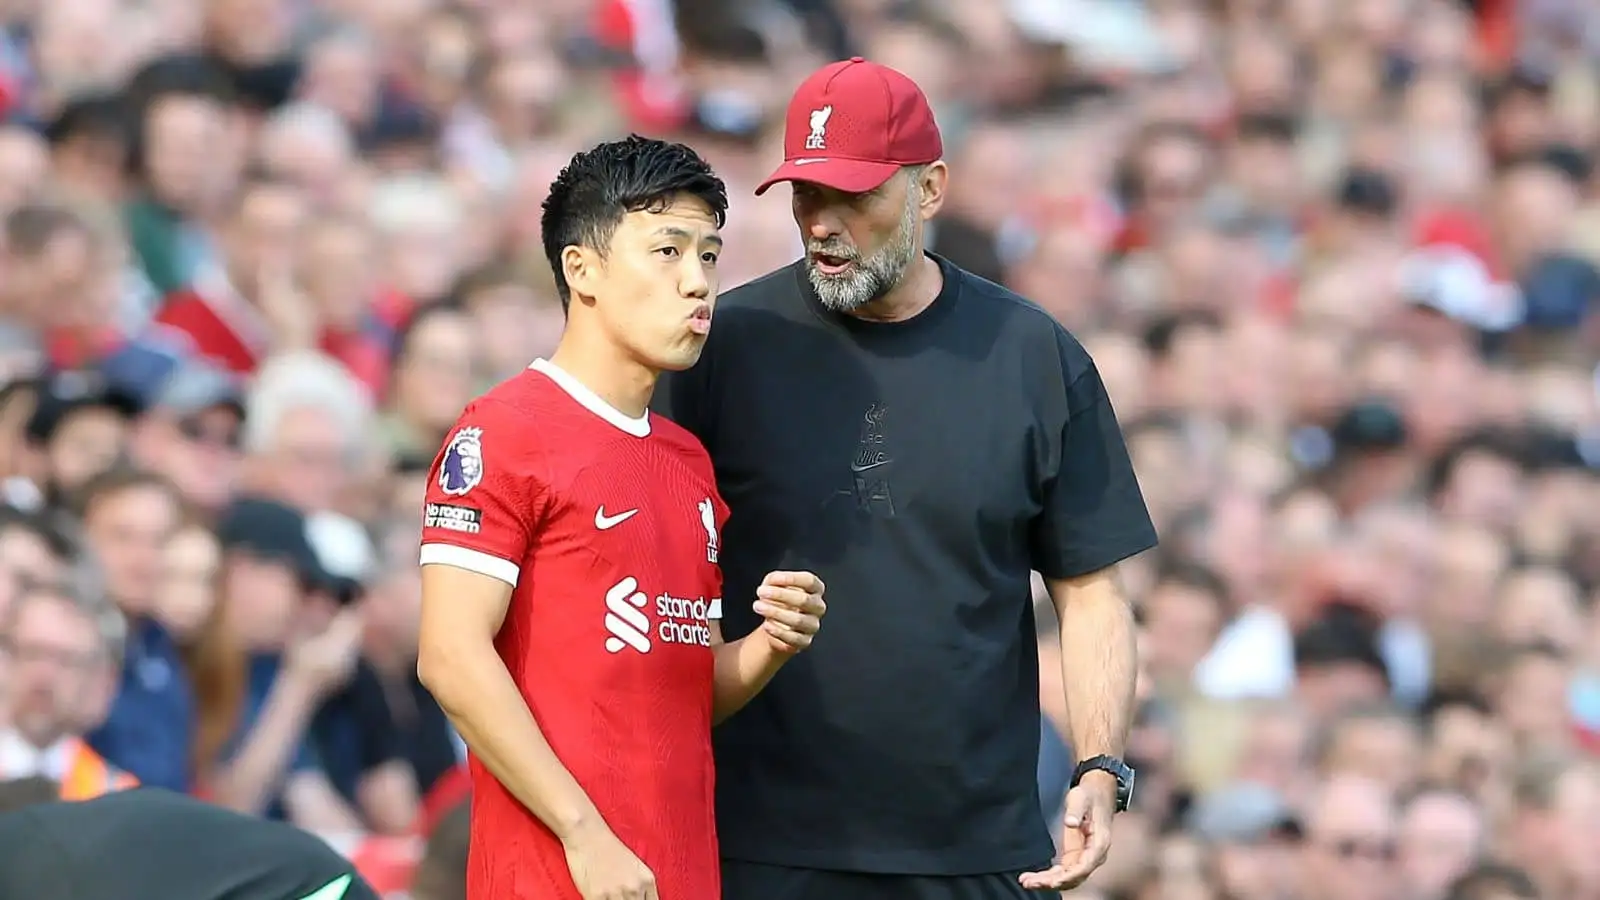 Jurgen Klopp, the manager of Liverpool talks with Wataru Endo of Liverpool prior to him joining the game during the Reds' 3-1 win over Bournemouth at Anfield